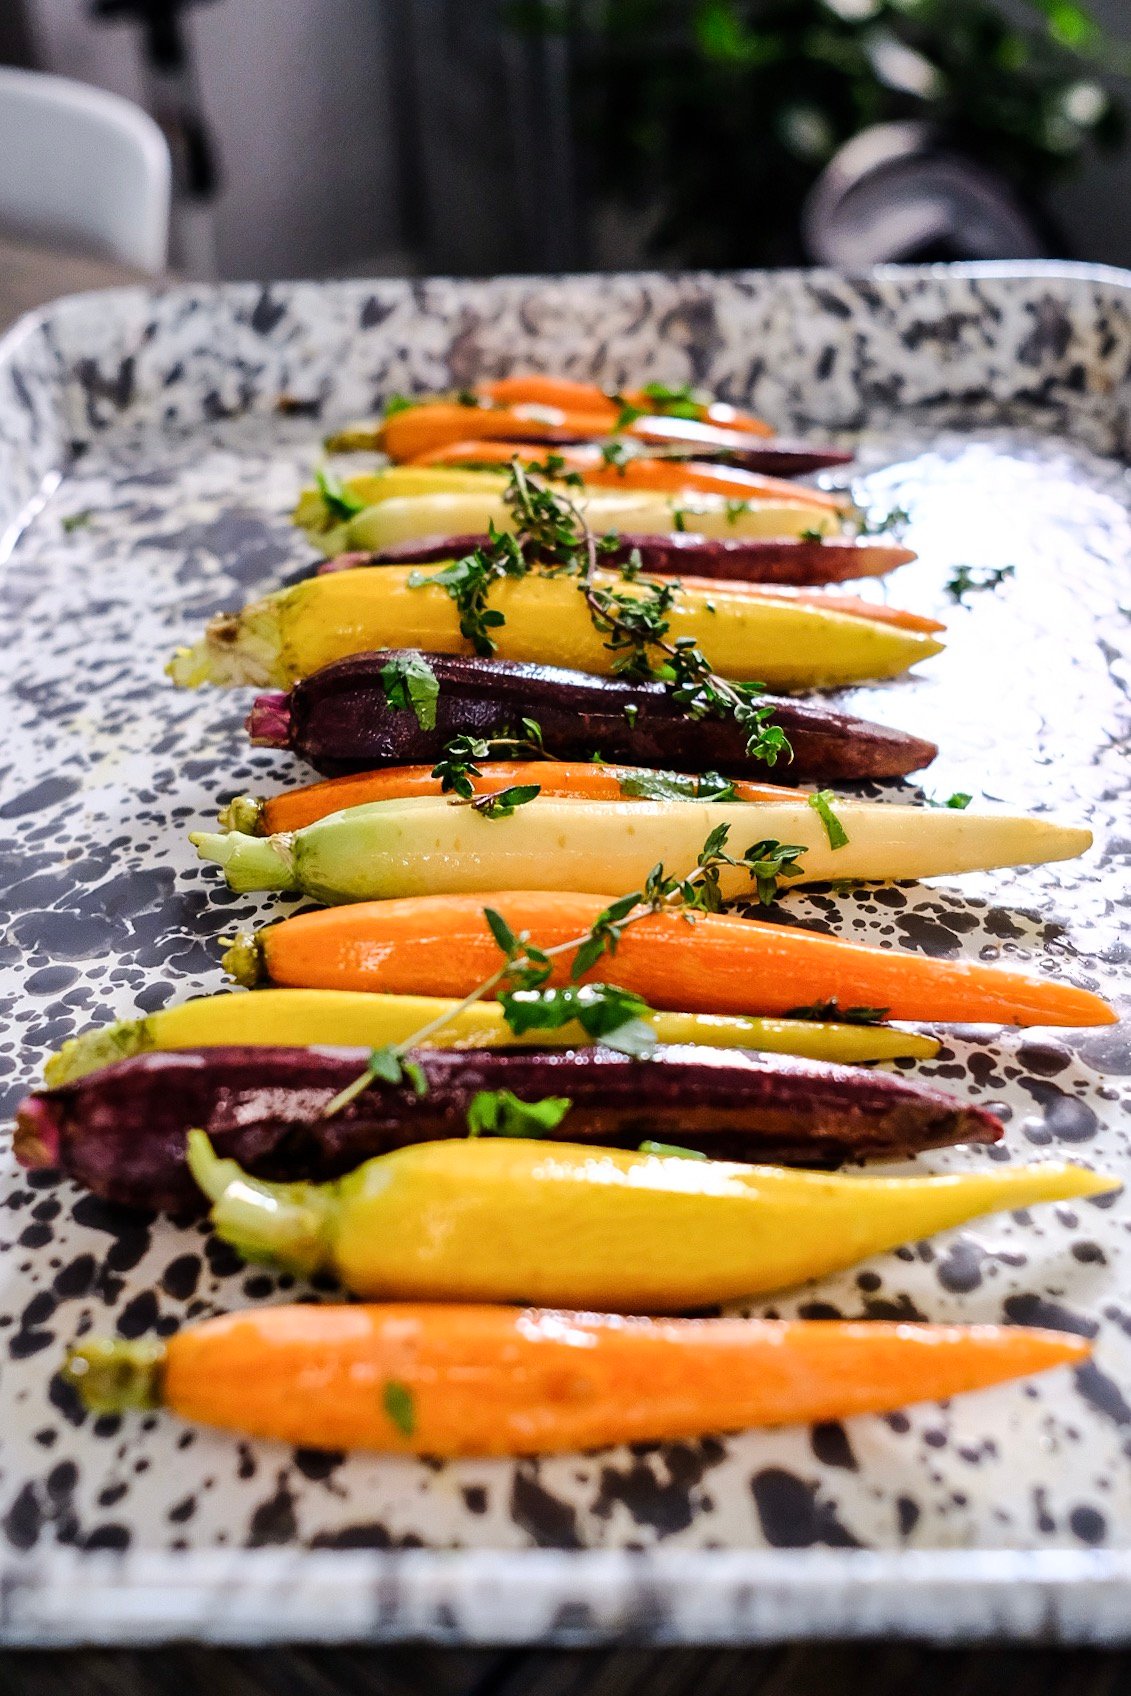 Lifestyle Blogger Chocolate and Lace shares her recipe for Roasted Honey Balsamic Carrots.